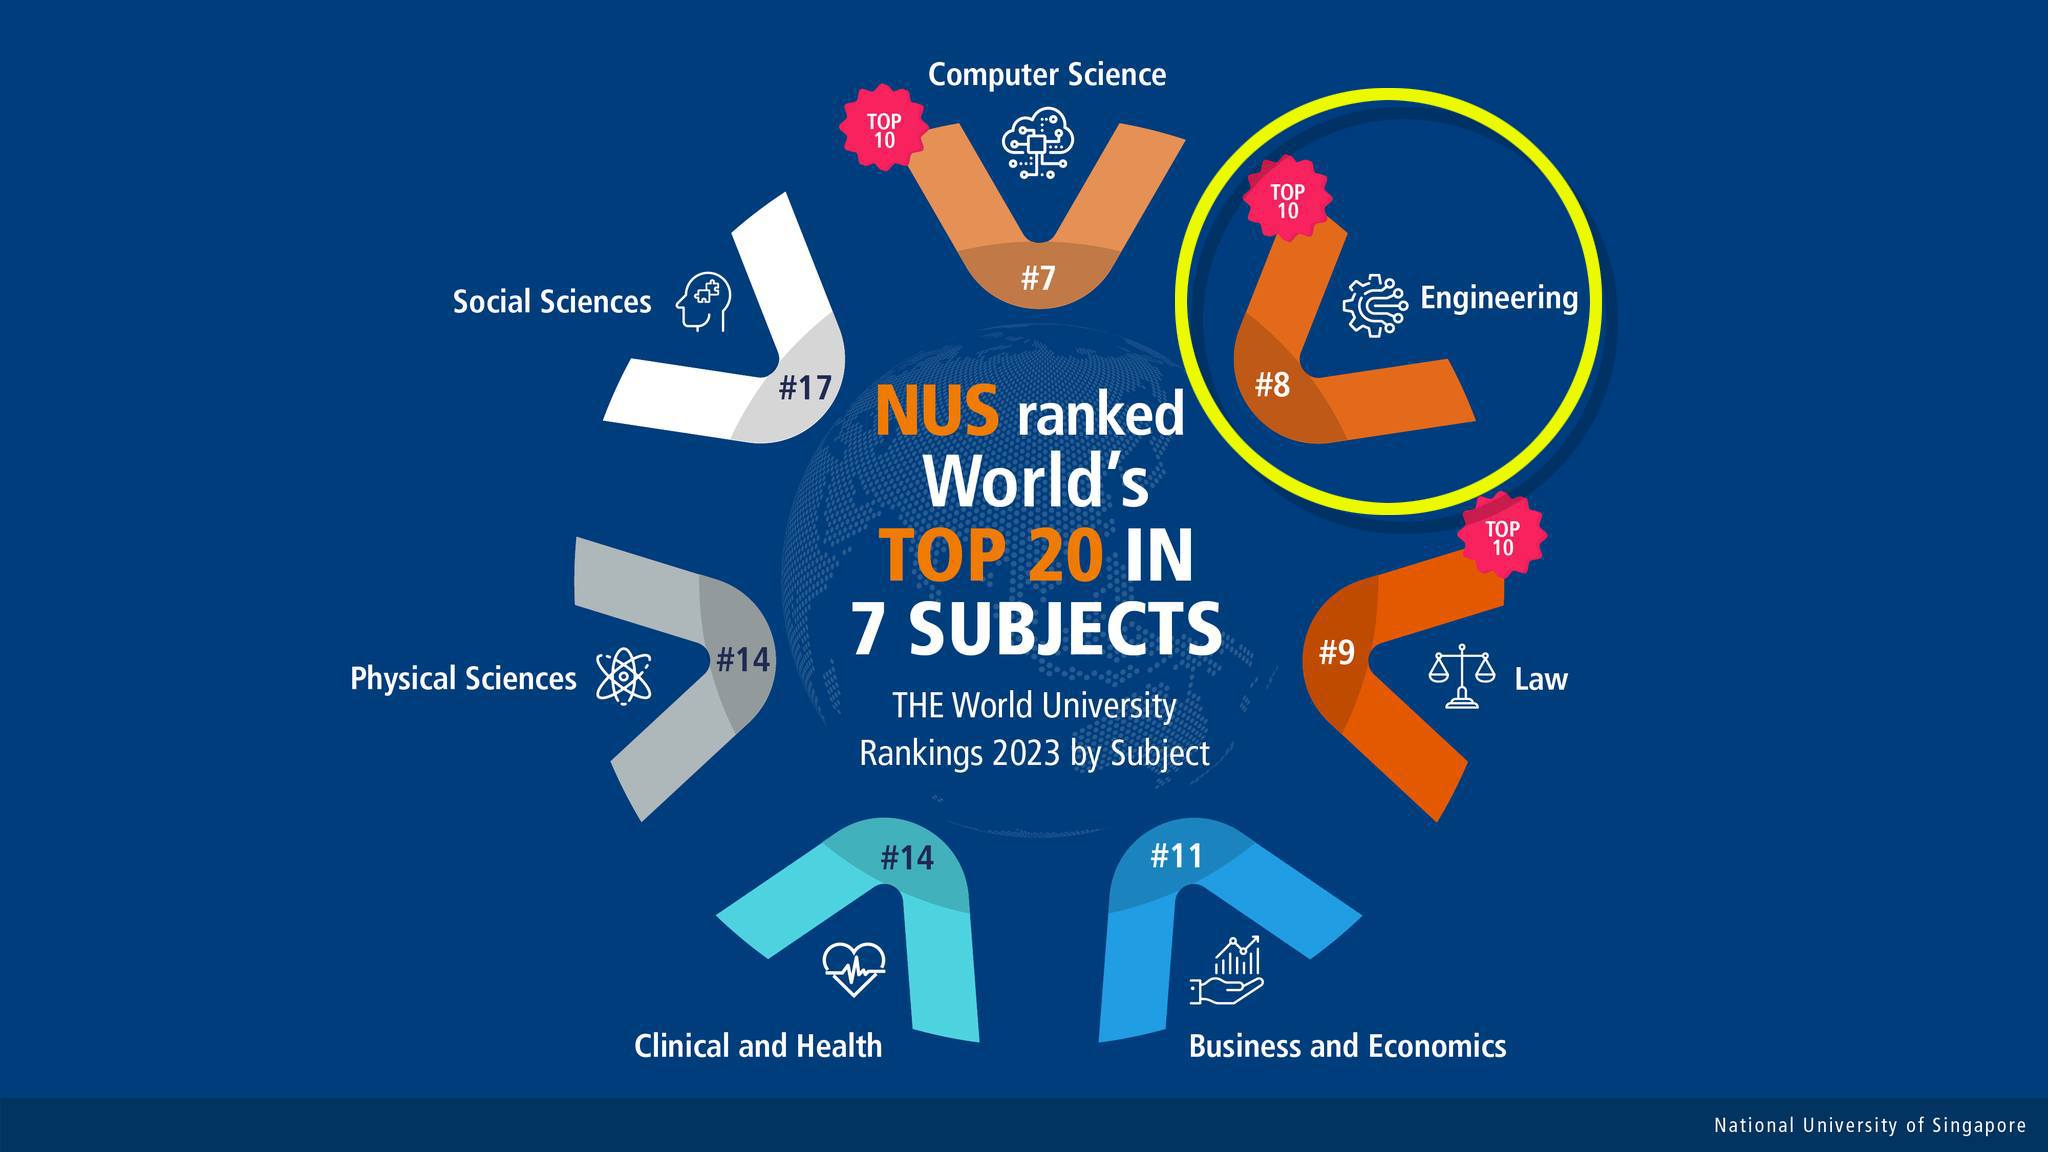 Engineering is one of three subjects in which NUS placed in the global top 10 for 2023